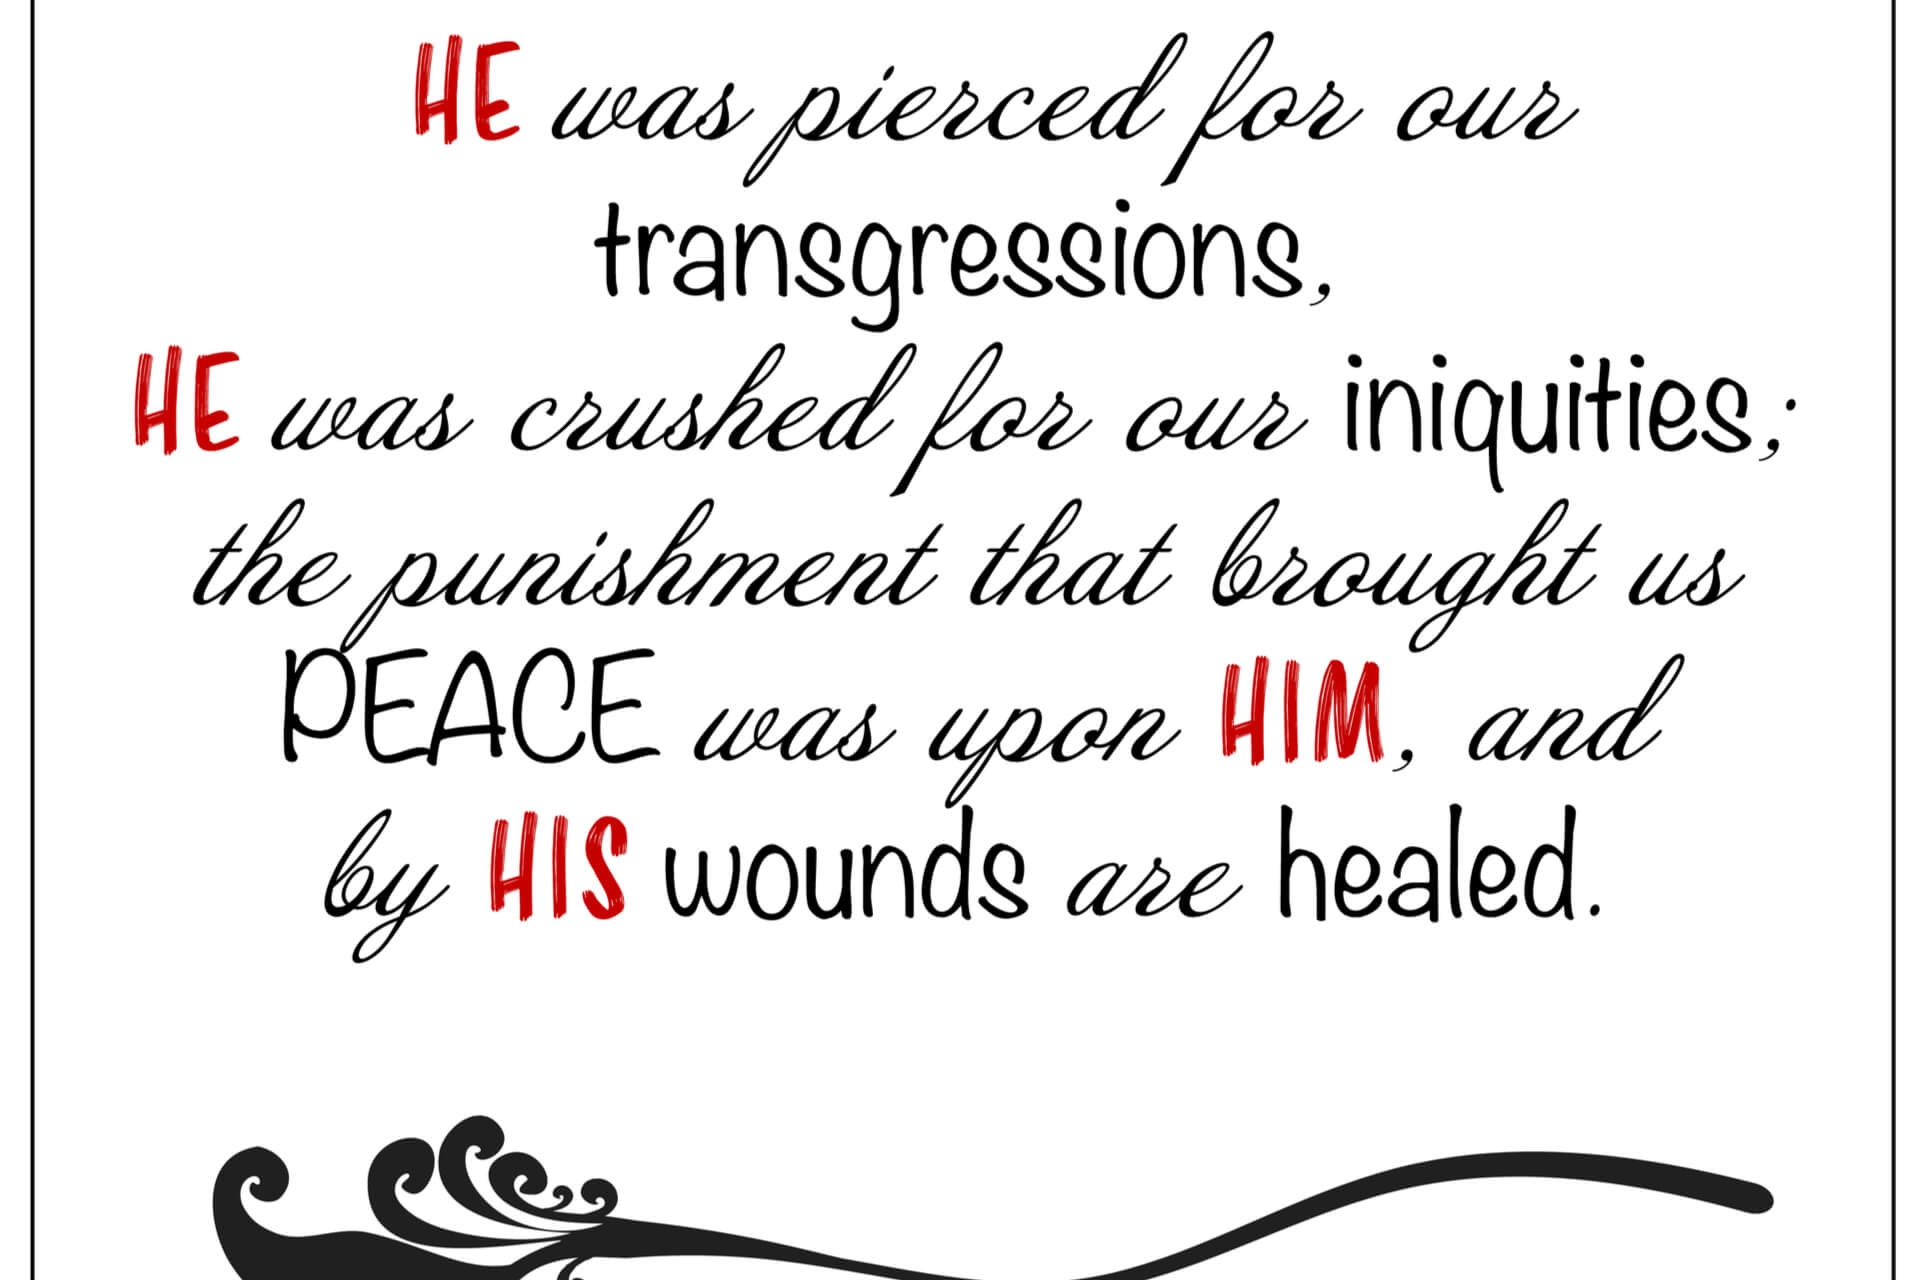 But he was pierced for our transgressions, he was crushed for our iniquities